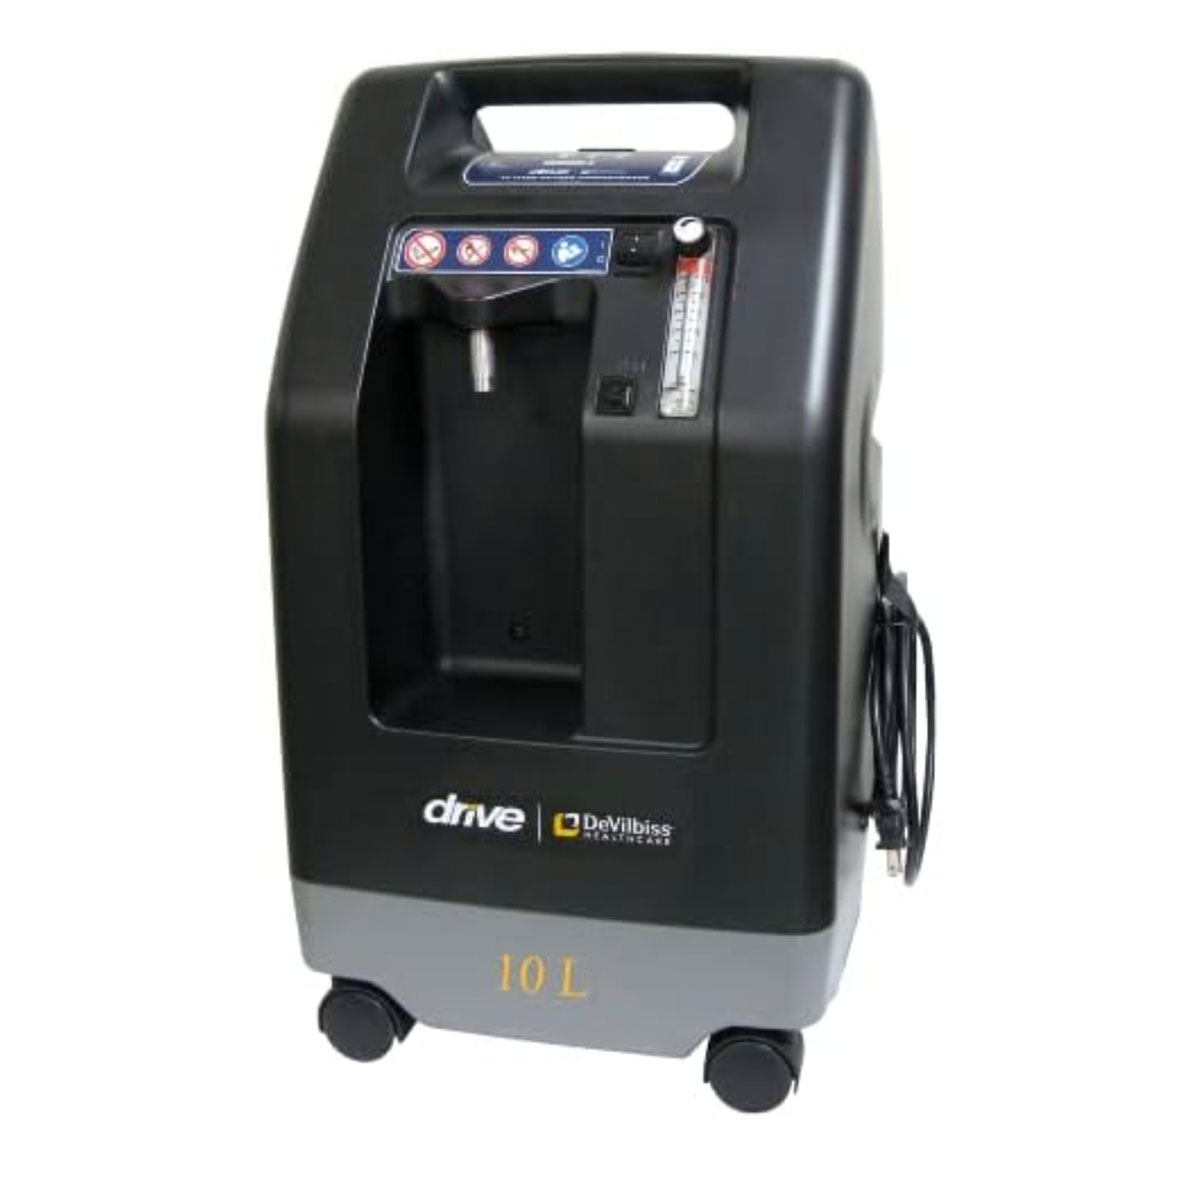 10 LPM Longfian Oxygen Concentrator On Sale Suppliers, Service Provider in Dlf belvedere towers